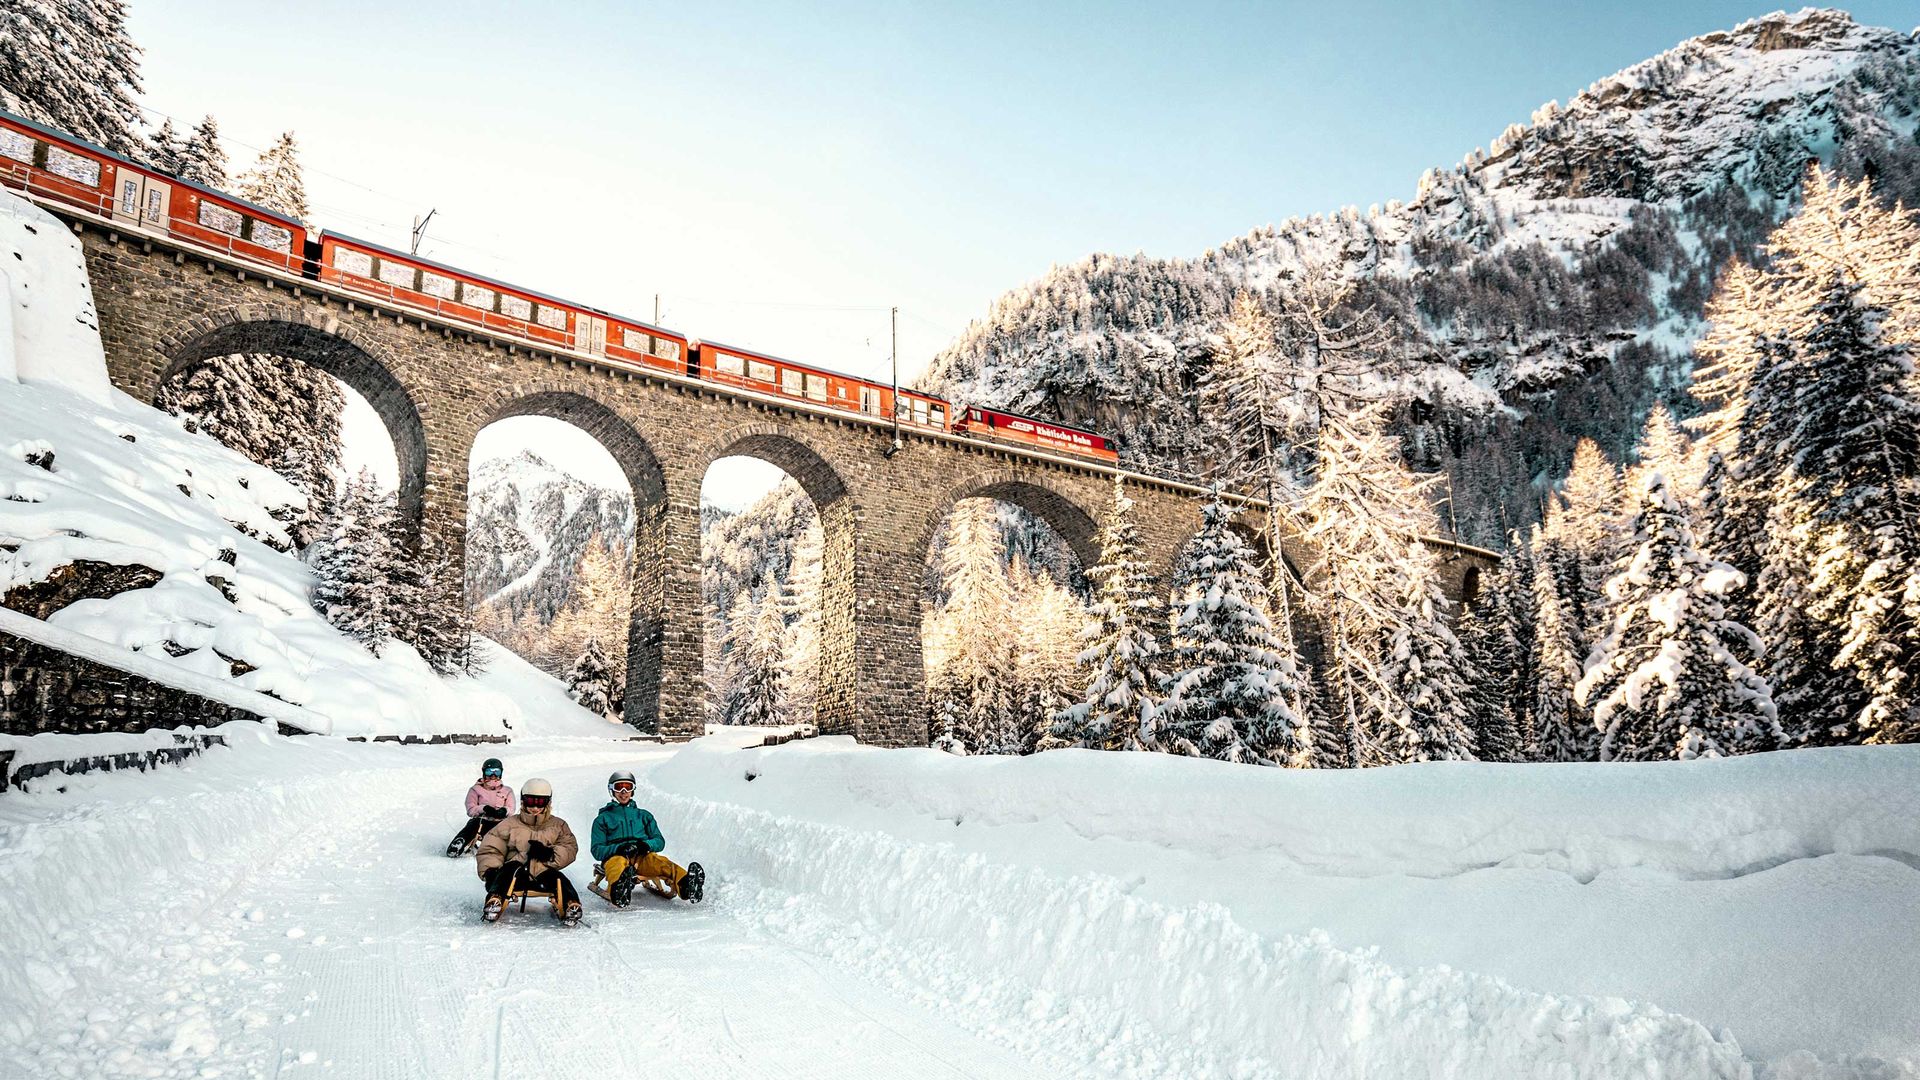 3 people ride down the piste on sledges. A large railway bridge with a train on it can be seen in the background. It is a marvellous winter sports day.